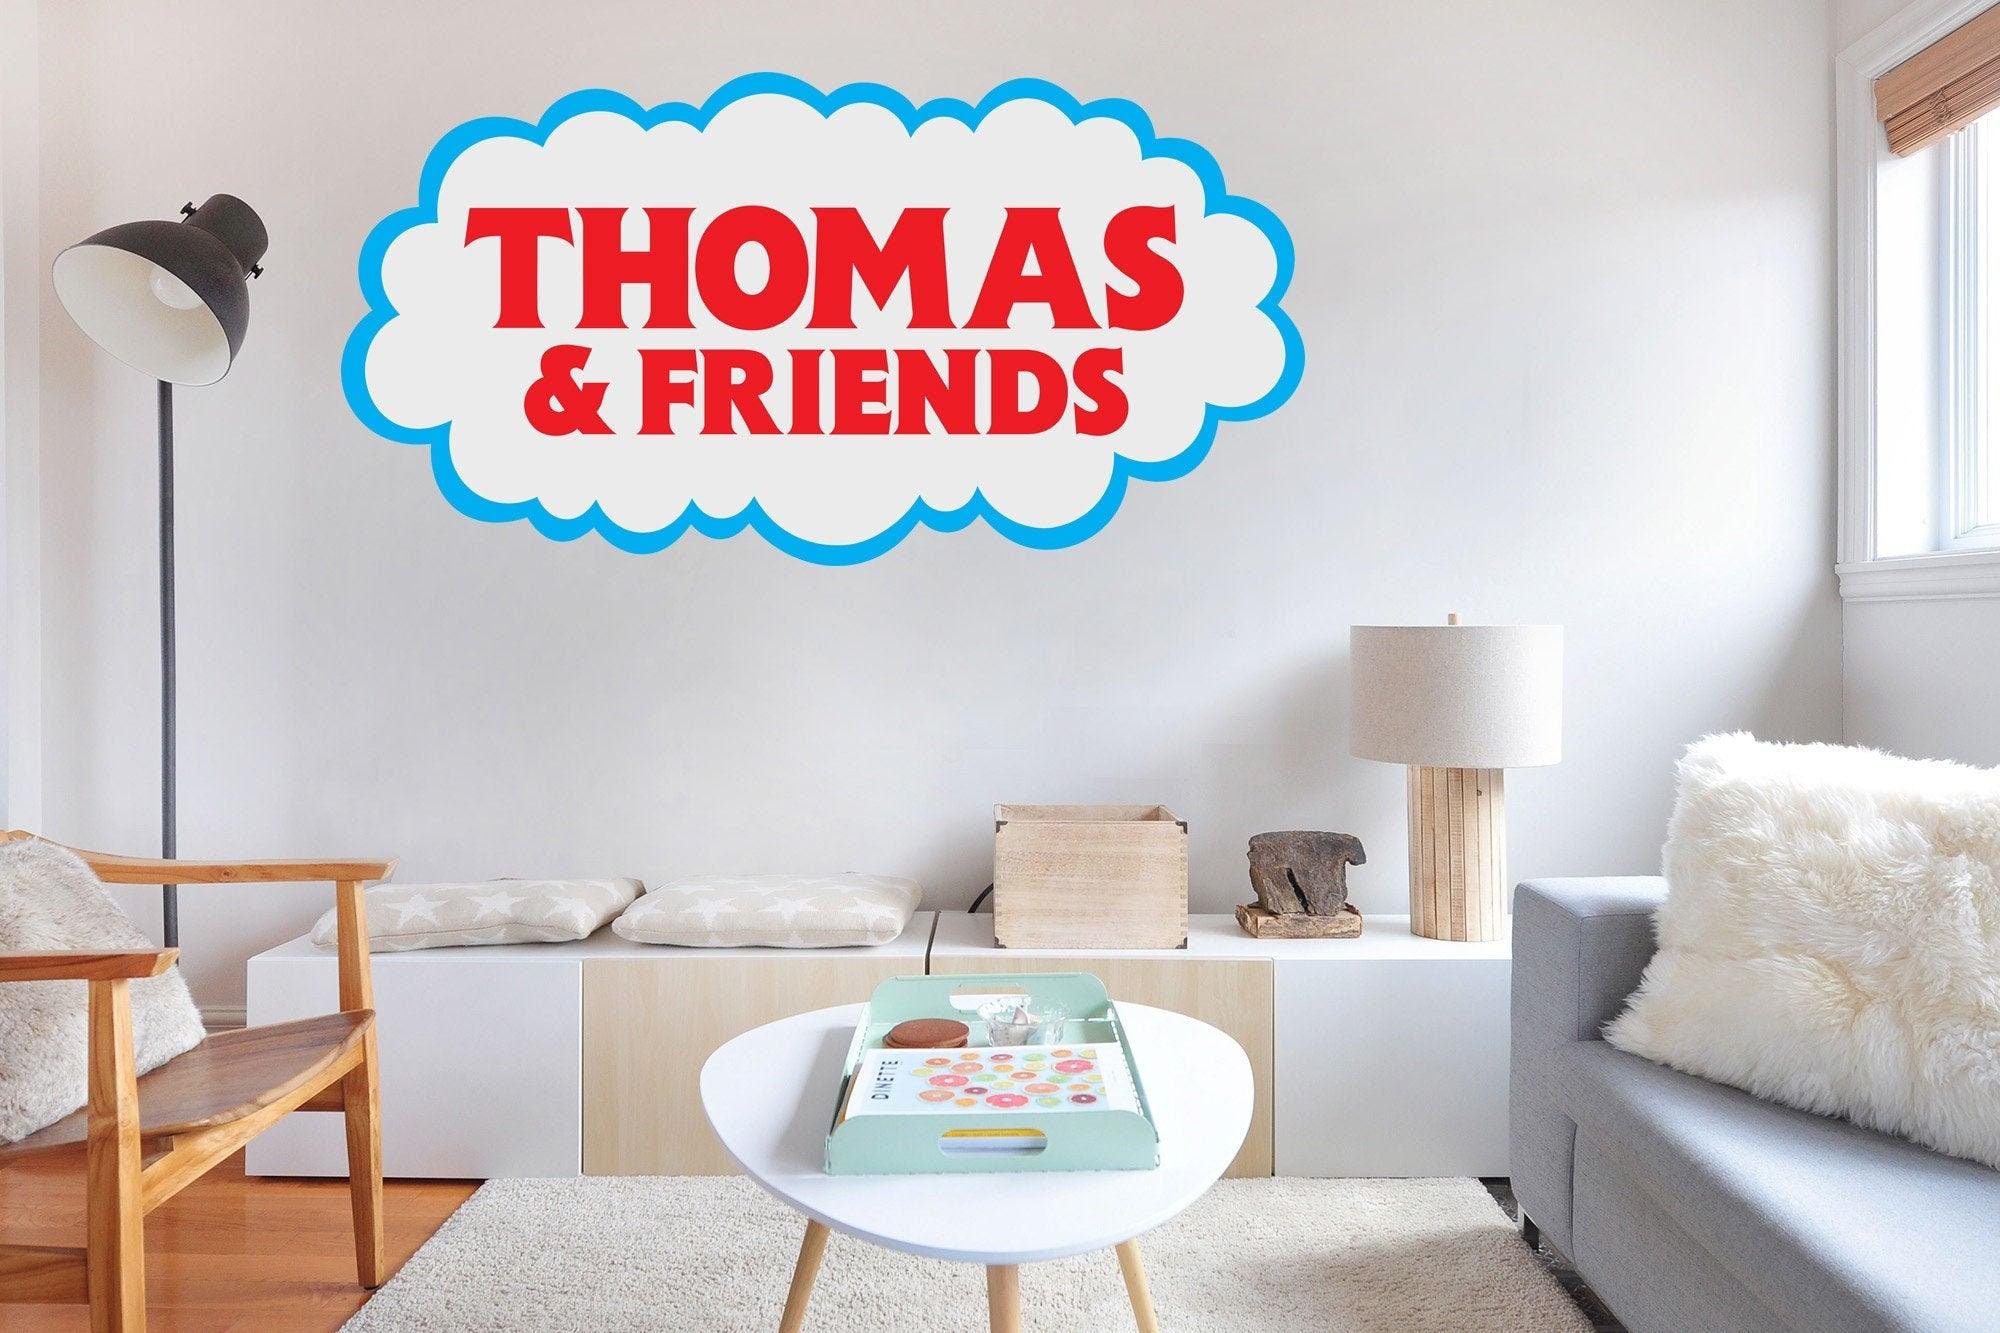 http://coolwalls.ca/cdn/shop/files/thomas-and-friends-decal-for-kids-room-soft-fabric-decal-peel-n-stick-decal-removable-anytime-coolwalls-ca-1.jpg?v=1692045463